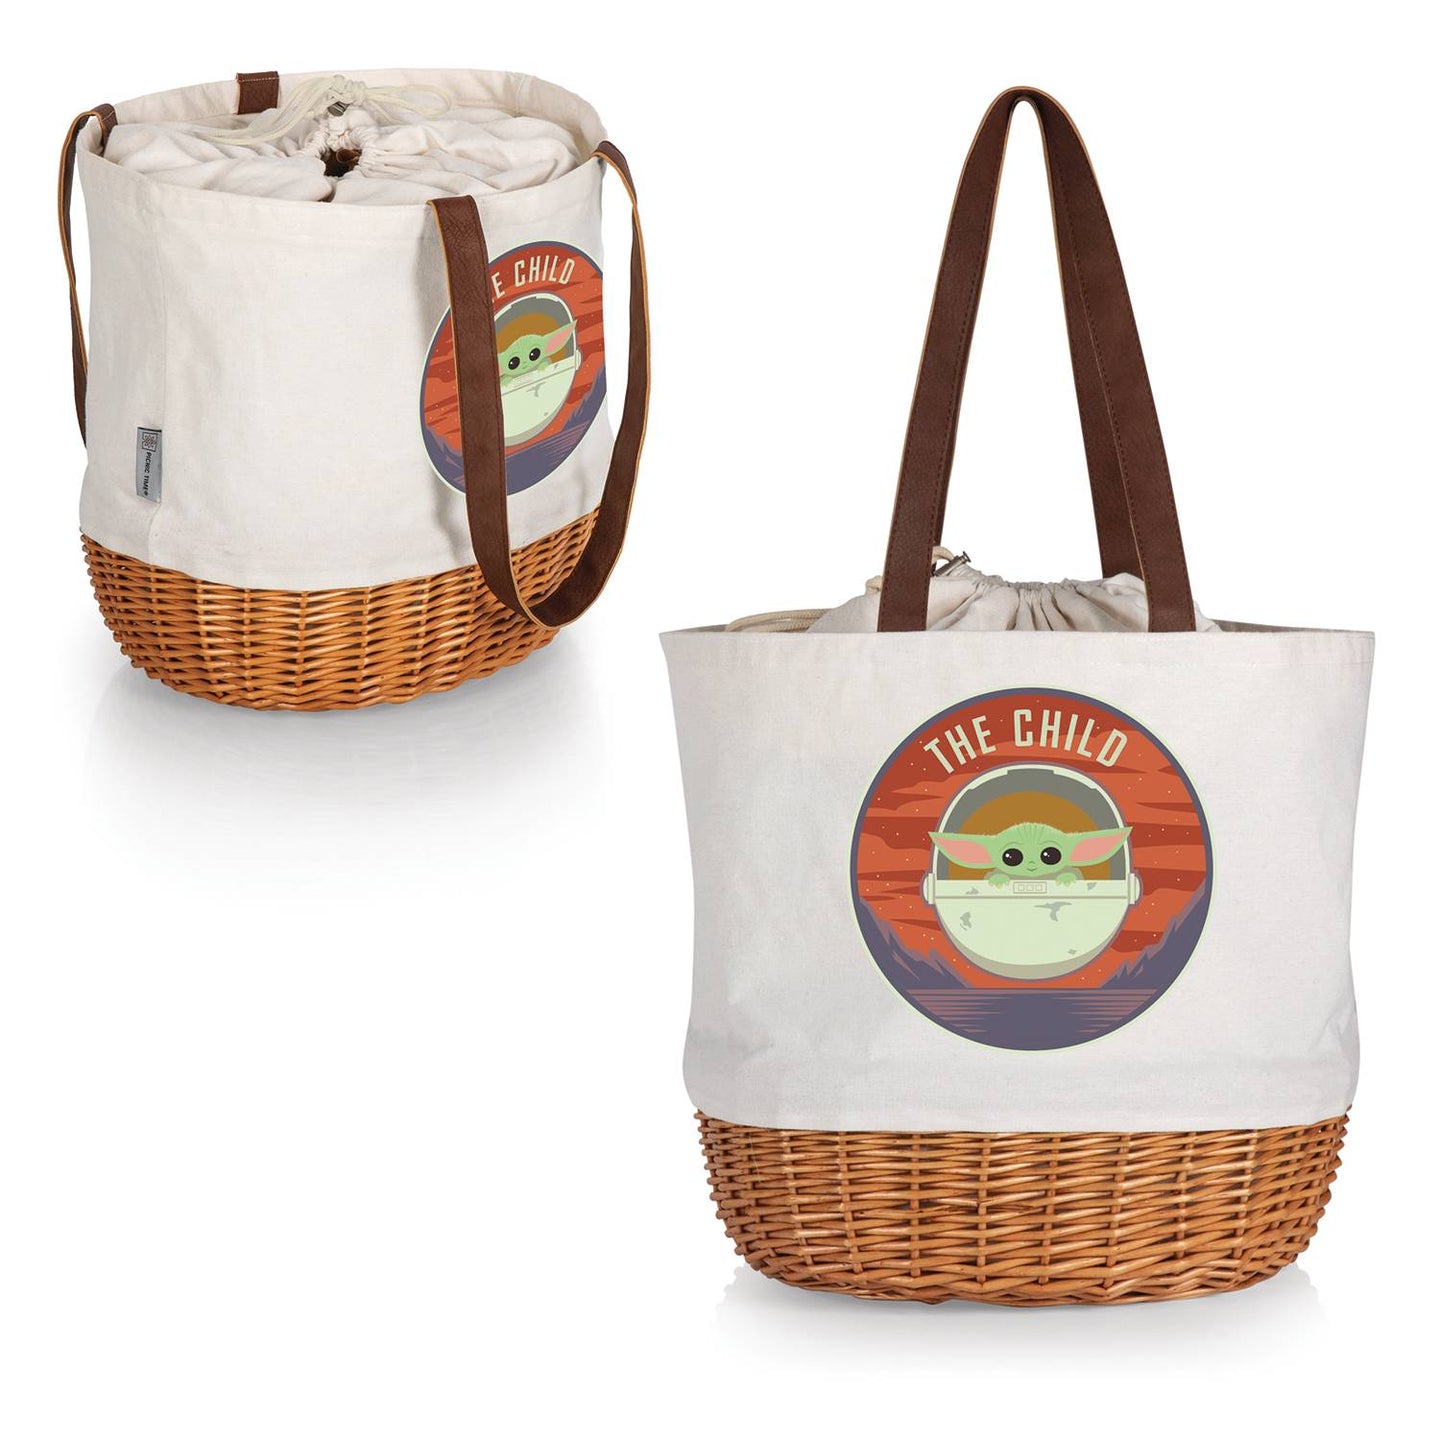 Star Wars The Child Canvas & Willow Basket Tote